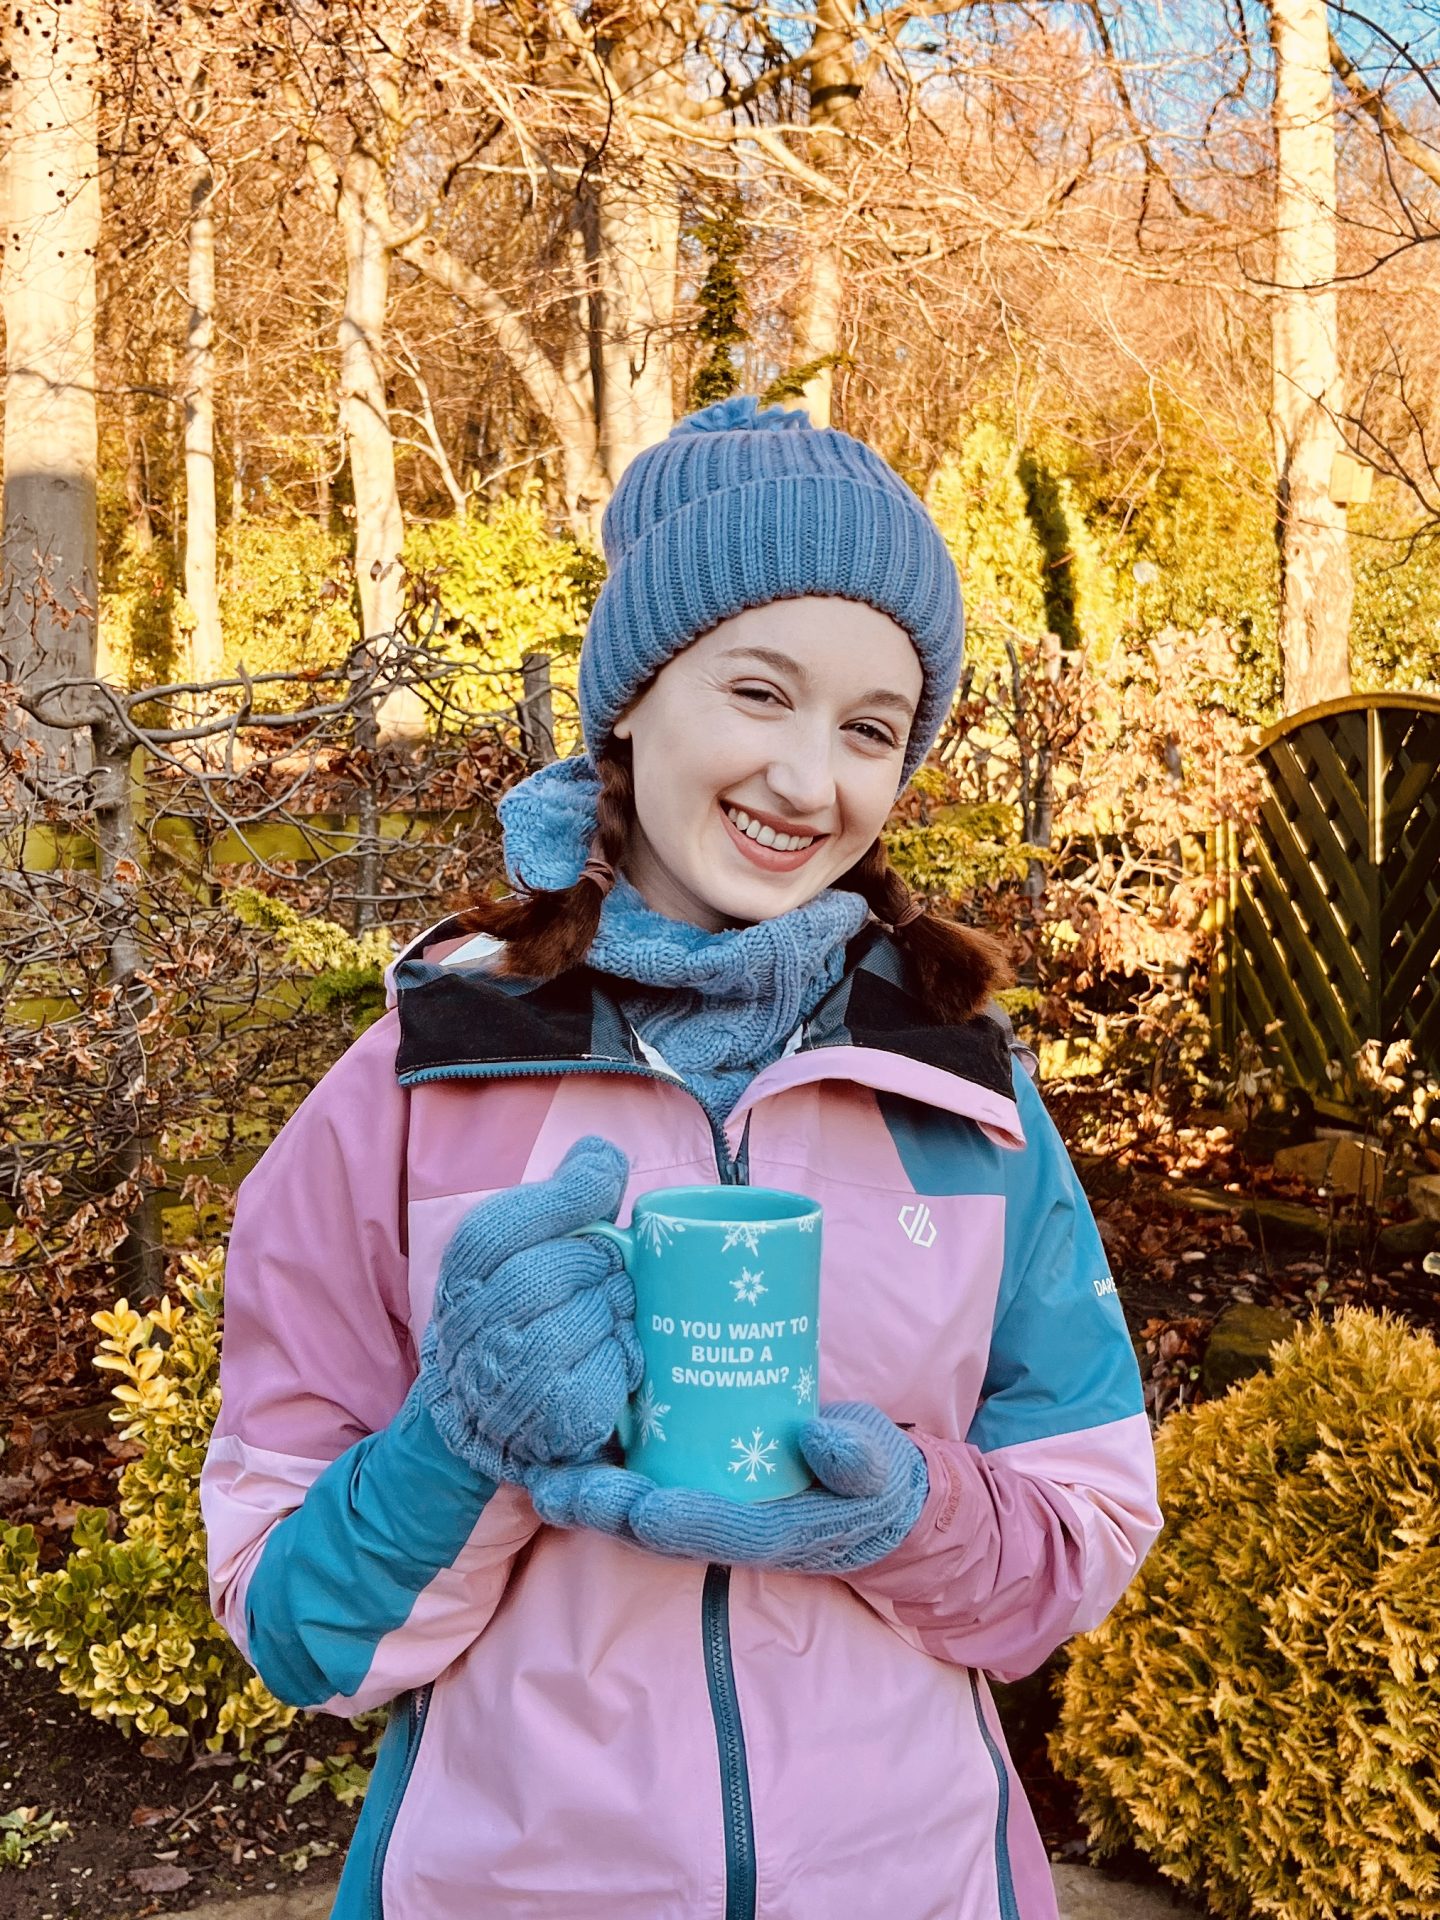 Pippa stood up outdoors, wearing her new HeatHolders hat, neckwarmer and gloves in the colour dusty blue. She's also wearing a pink and blue raincoat and has her hair in plaits, holding up a blue mug and smiling.